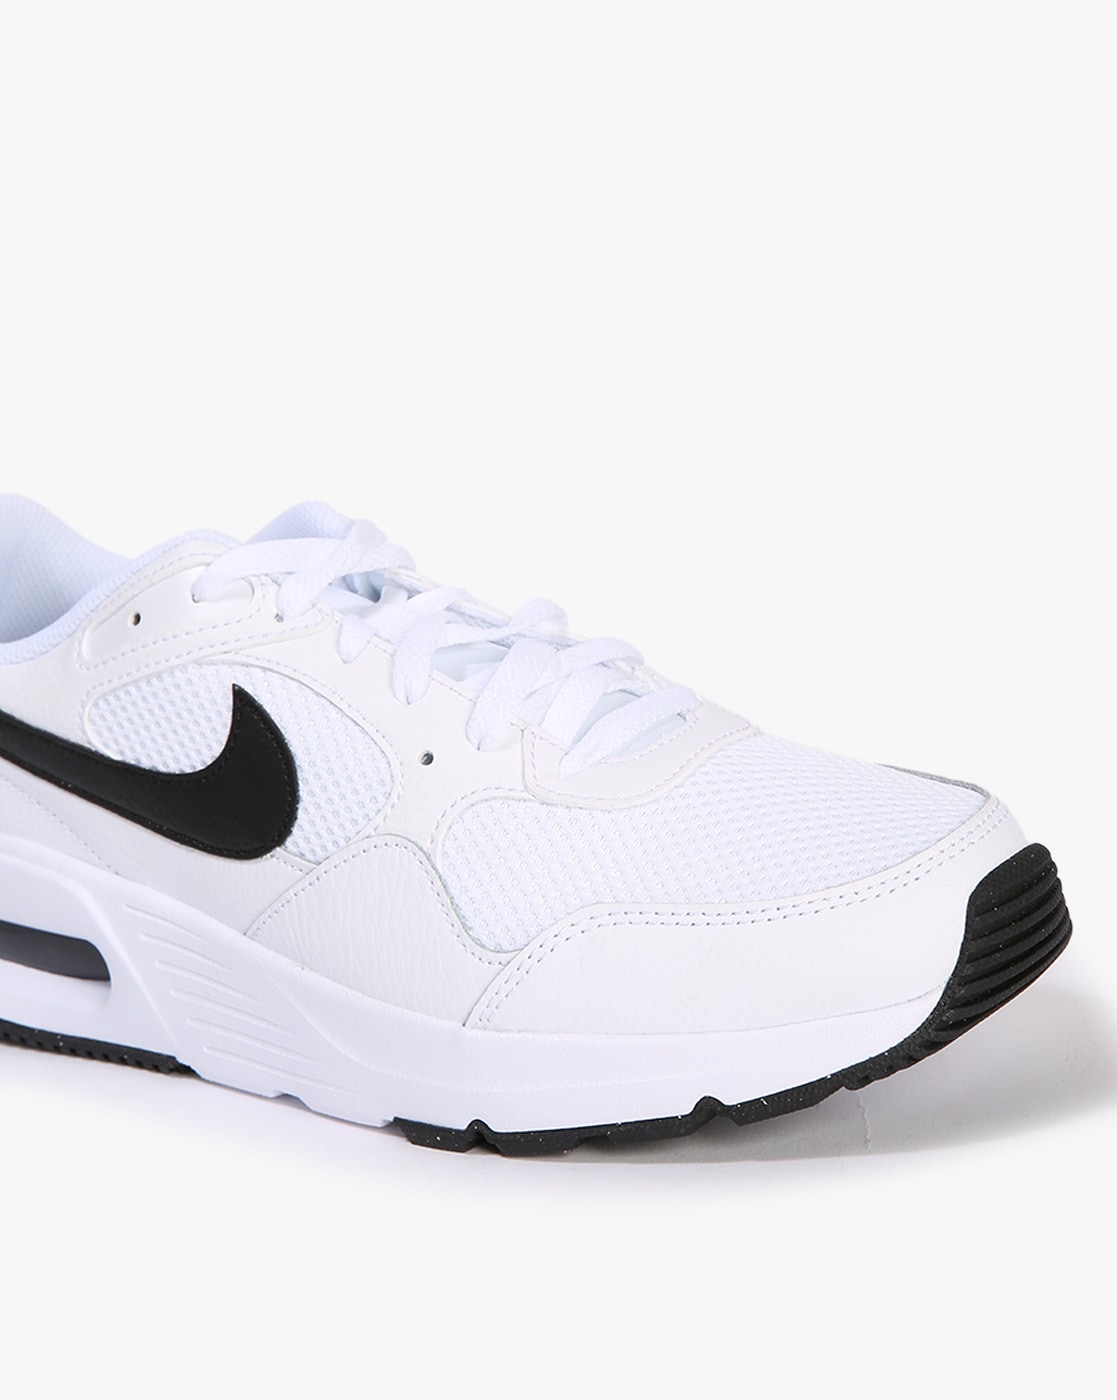 Men's Nike White Sneakers & Athletic Shoes | Nordstrom